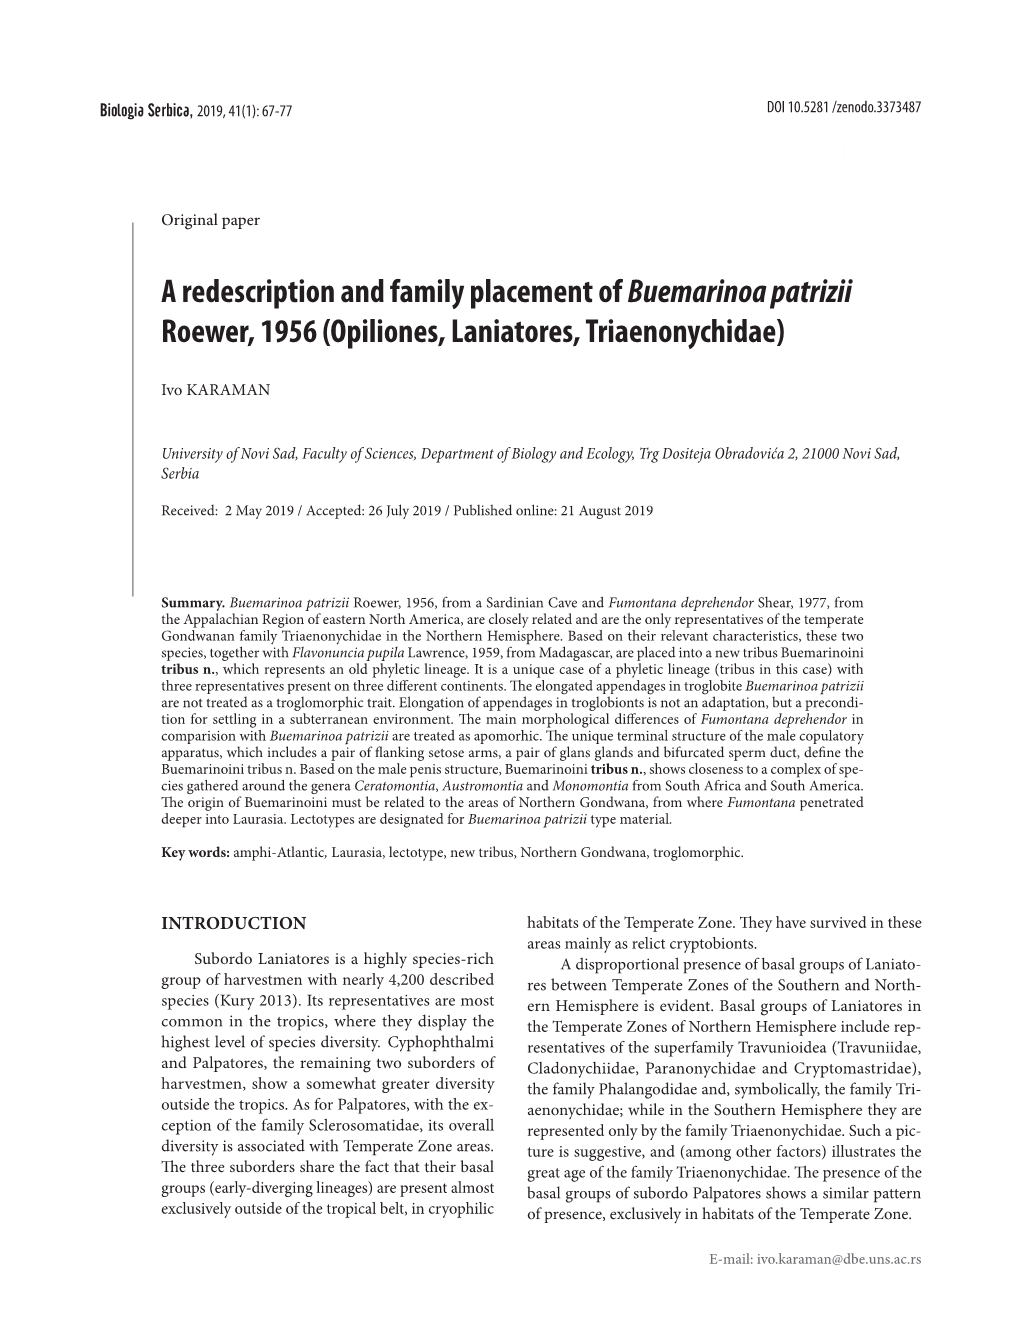 A Redescription and Family Placement of Buemarinoa Patrizii Roewer, 1956 (Opiliones, Laniatores, Triaenonychidae)